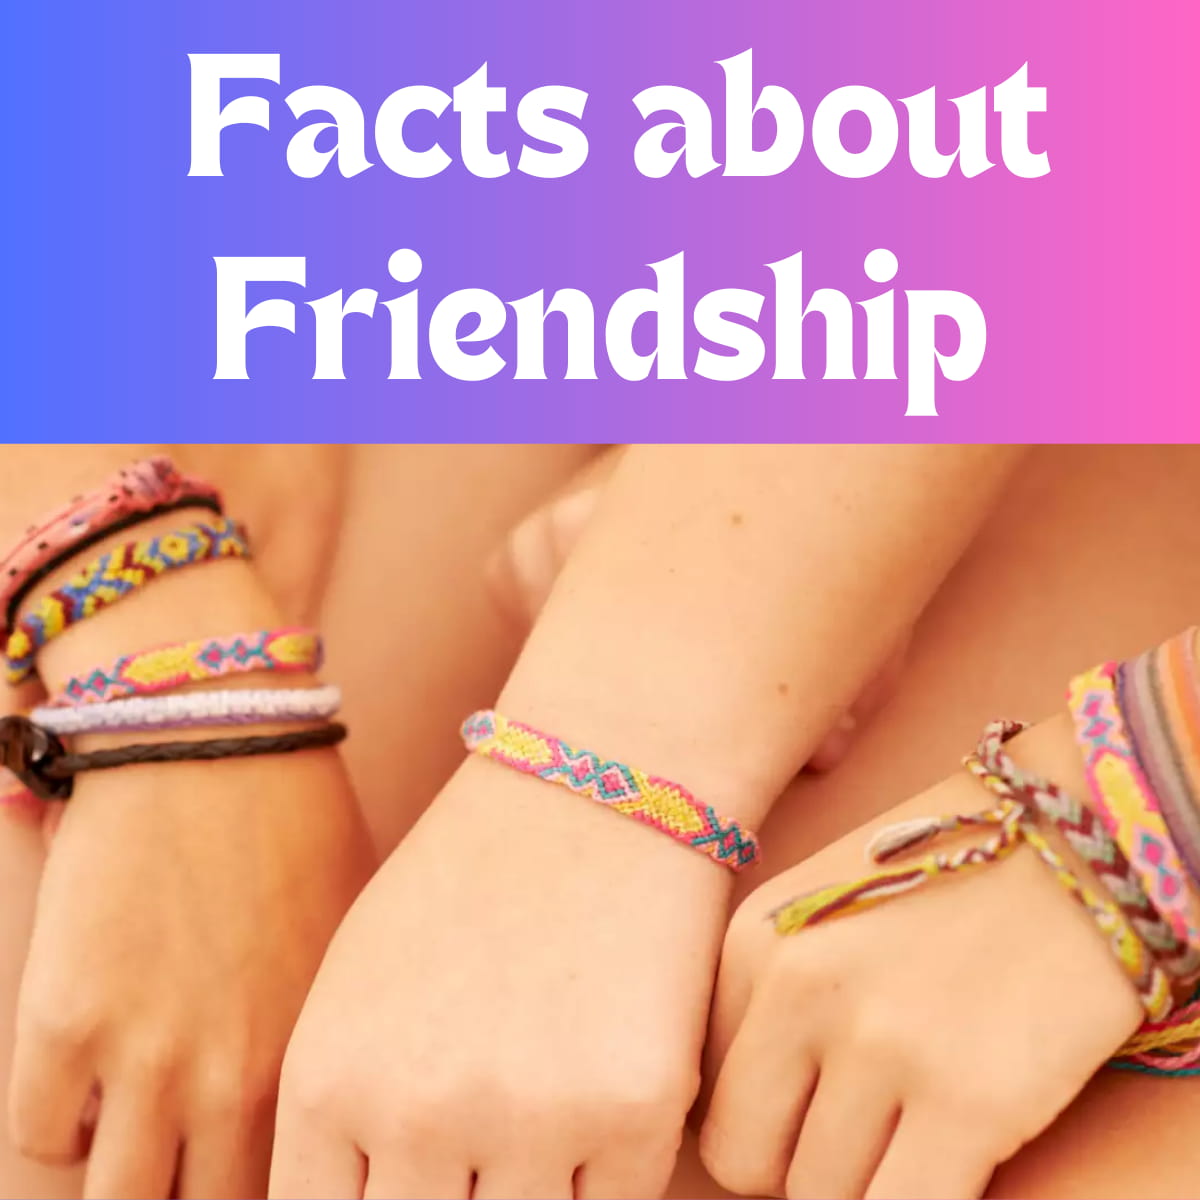 Friendship Facts. True Friendship Facts, Facts, Cool facts, Interesting facts